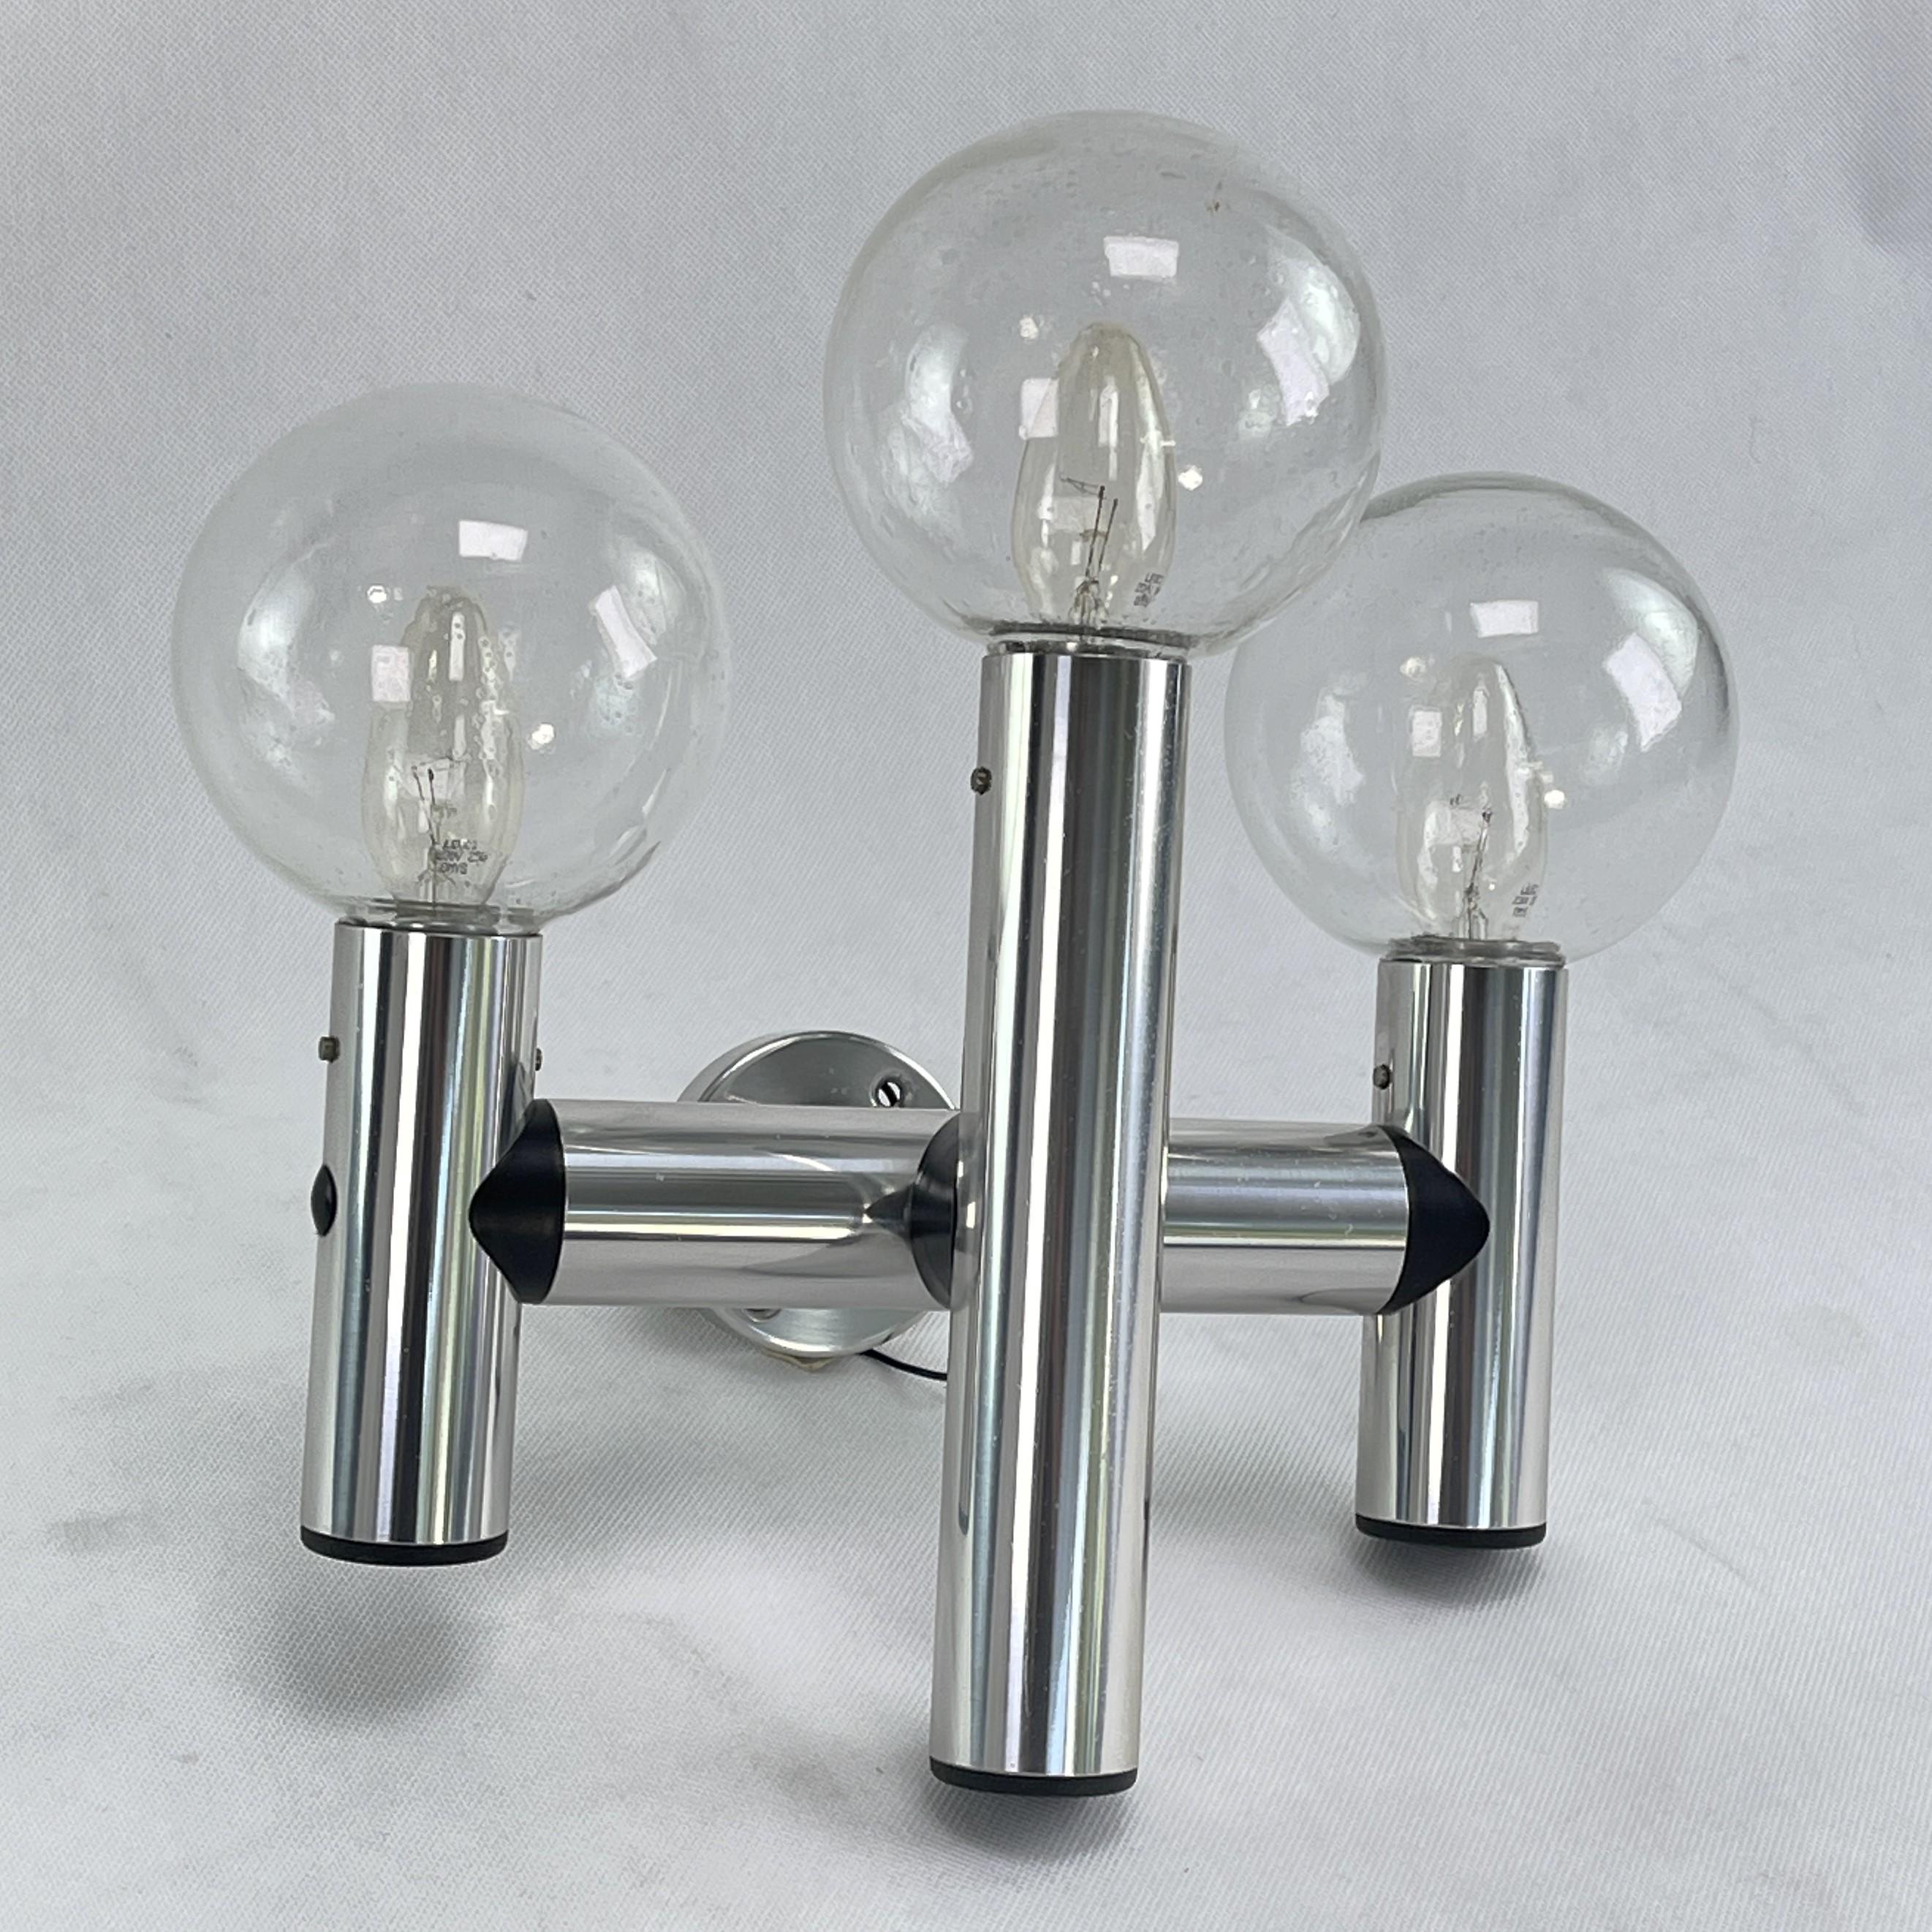 Set of 2 x Aluminium Wall Lamps by J.T. Kalmar- 1970s

JT Kalmar wall lamps are a remarkable work of art that combines modern design with aesthetics. These two lamps were designed by the renowned Austrian designer JT Kalmar and date from the